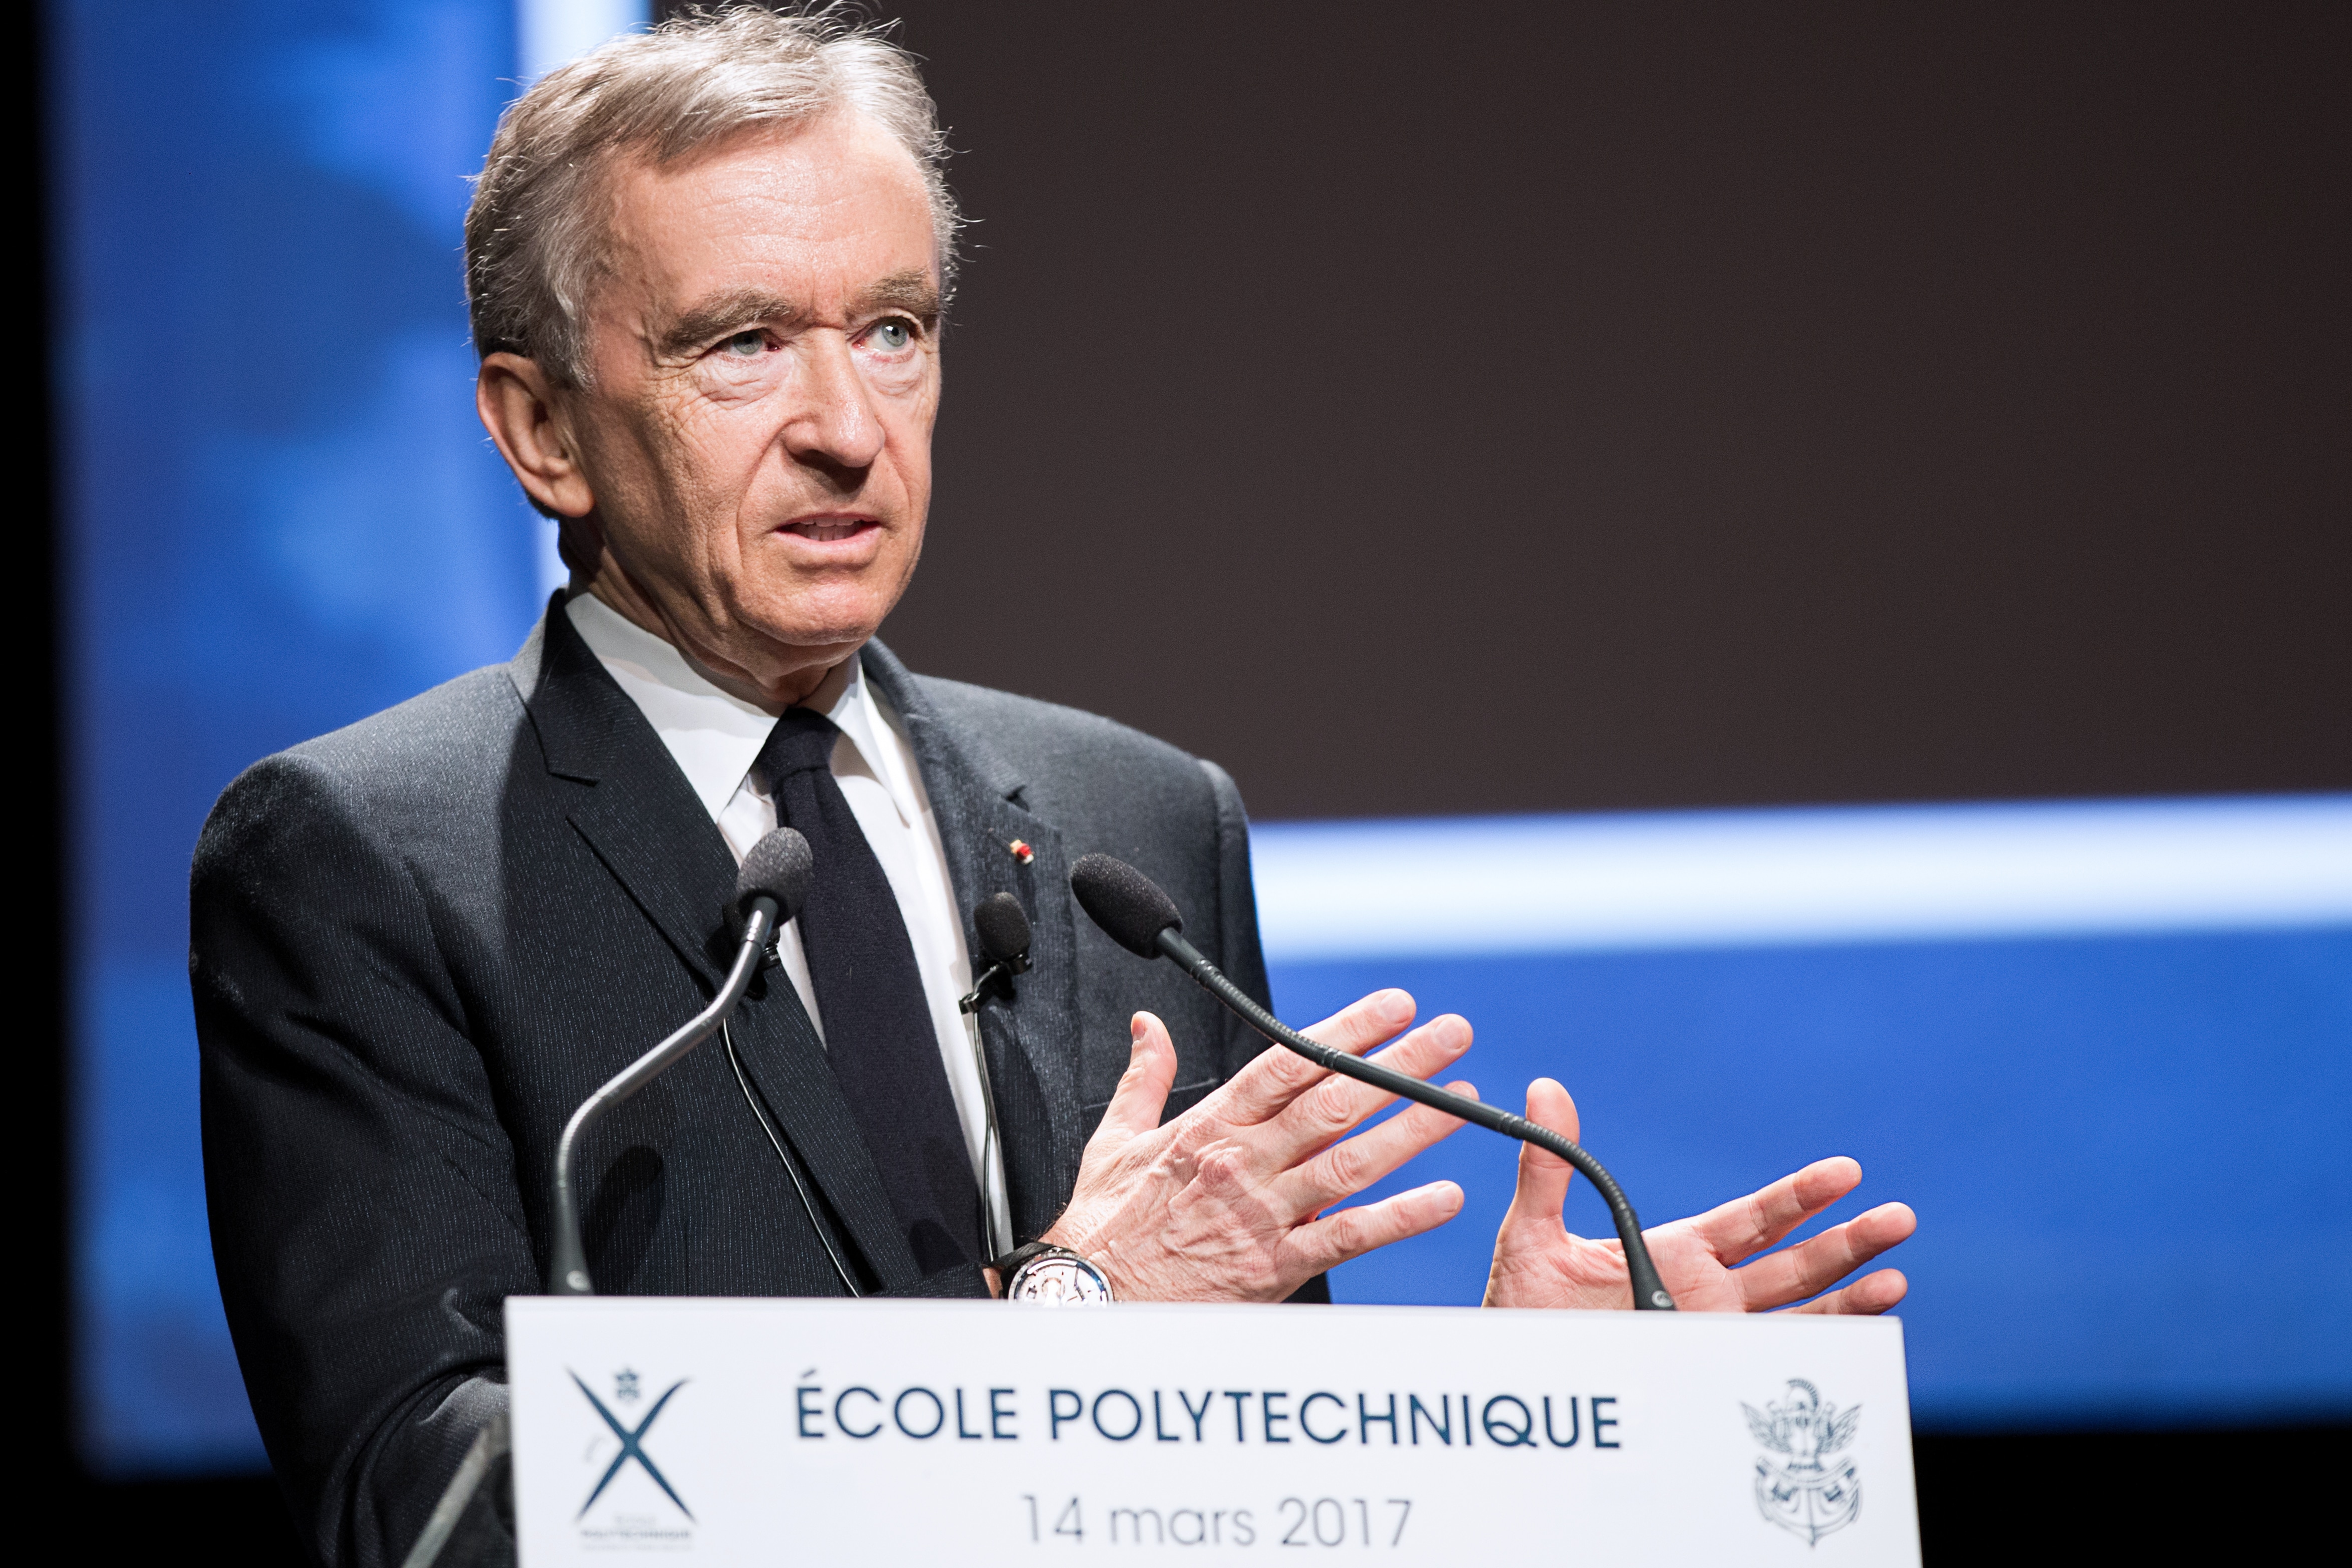 What Will Bernard Arnault Do with His Latest Real Estate Acquisition? -  Irenebrination: Notes on Architecture, Art, Fashion, Fashion Law, Science &  Technology